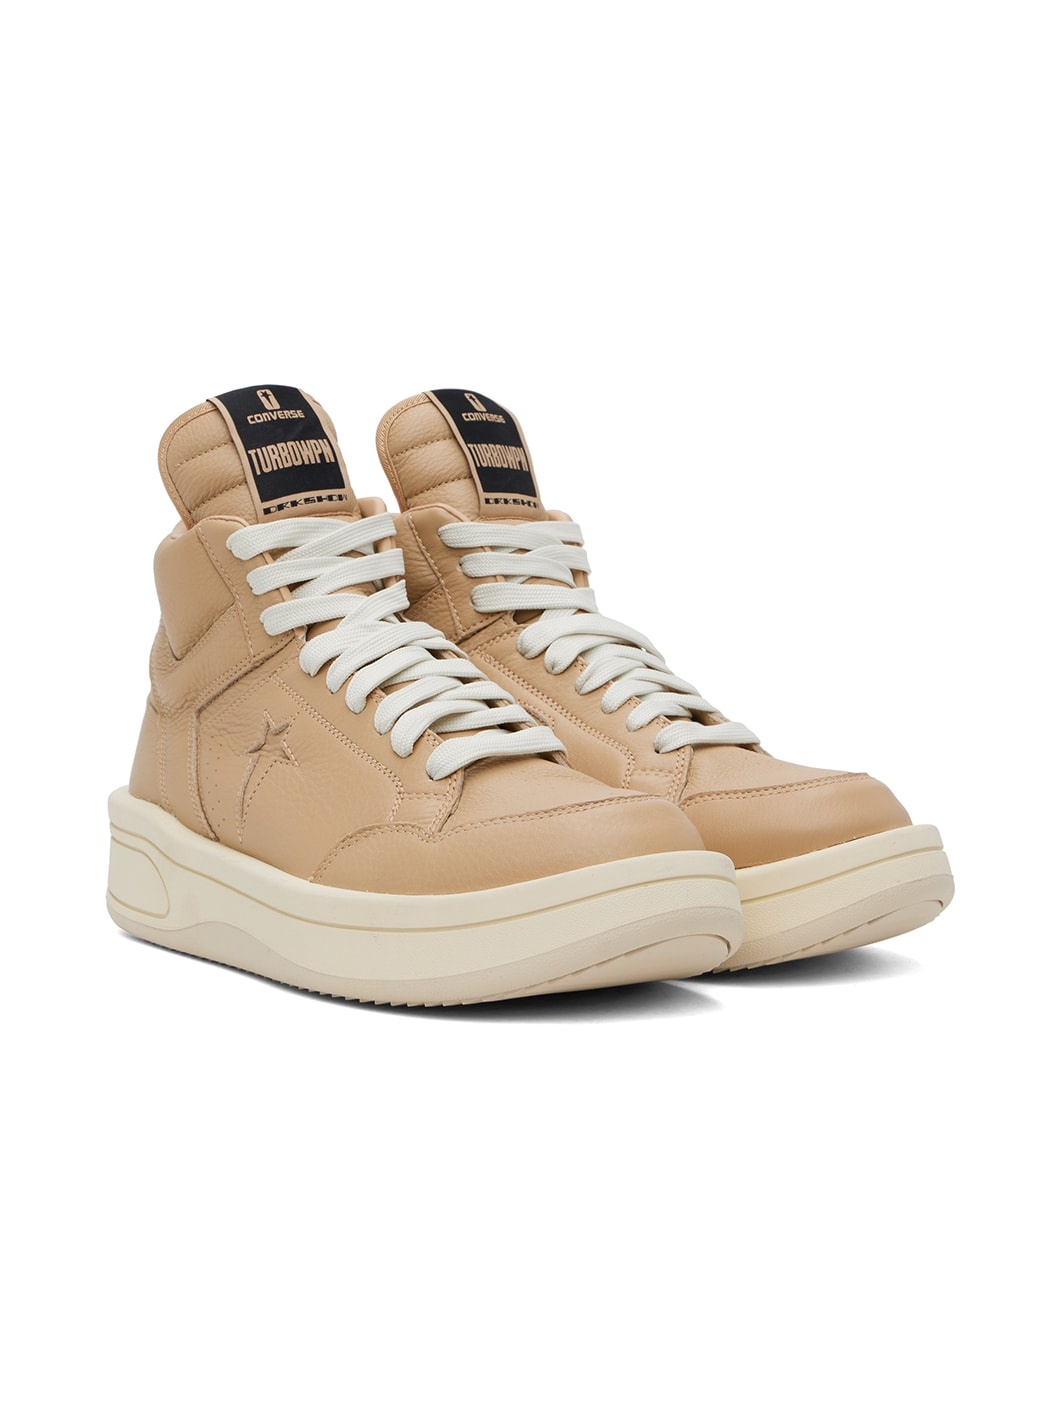 Tan Converse Edition TURBOWPN Mid Sneakers - 4